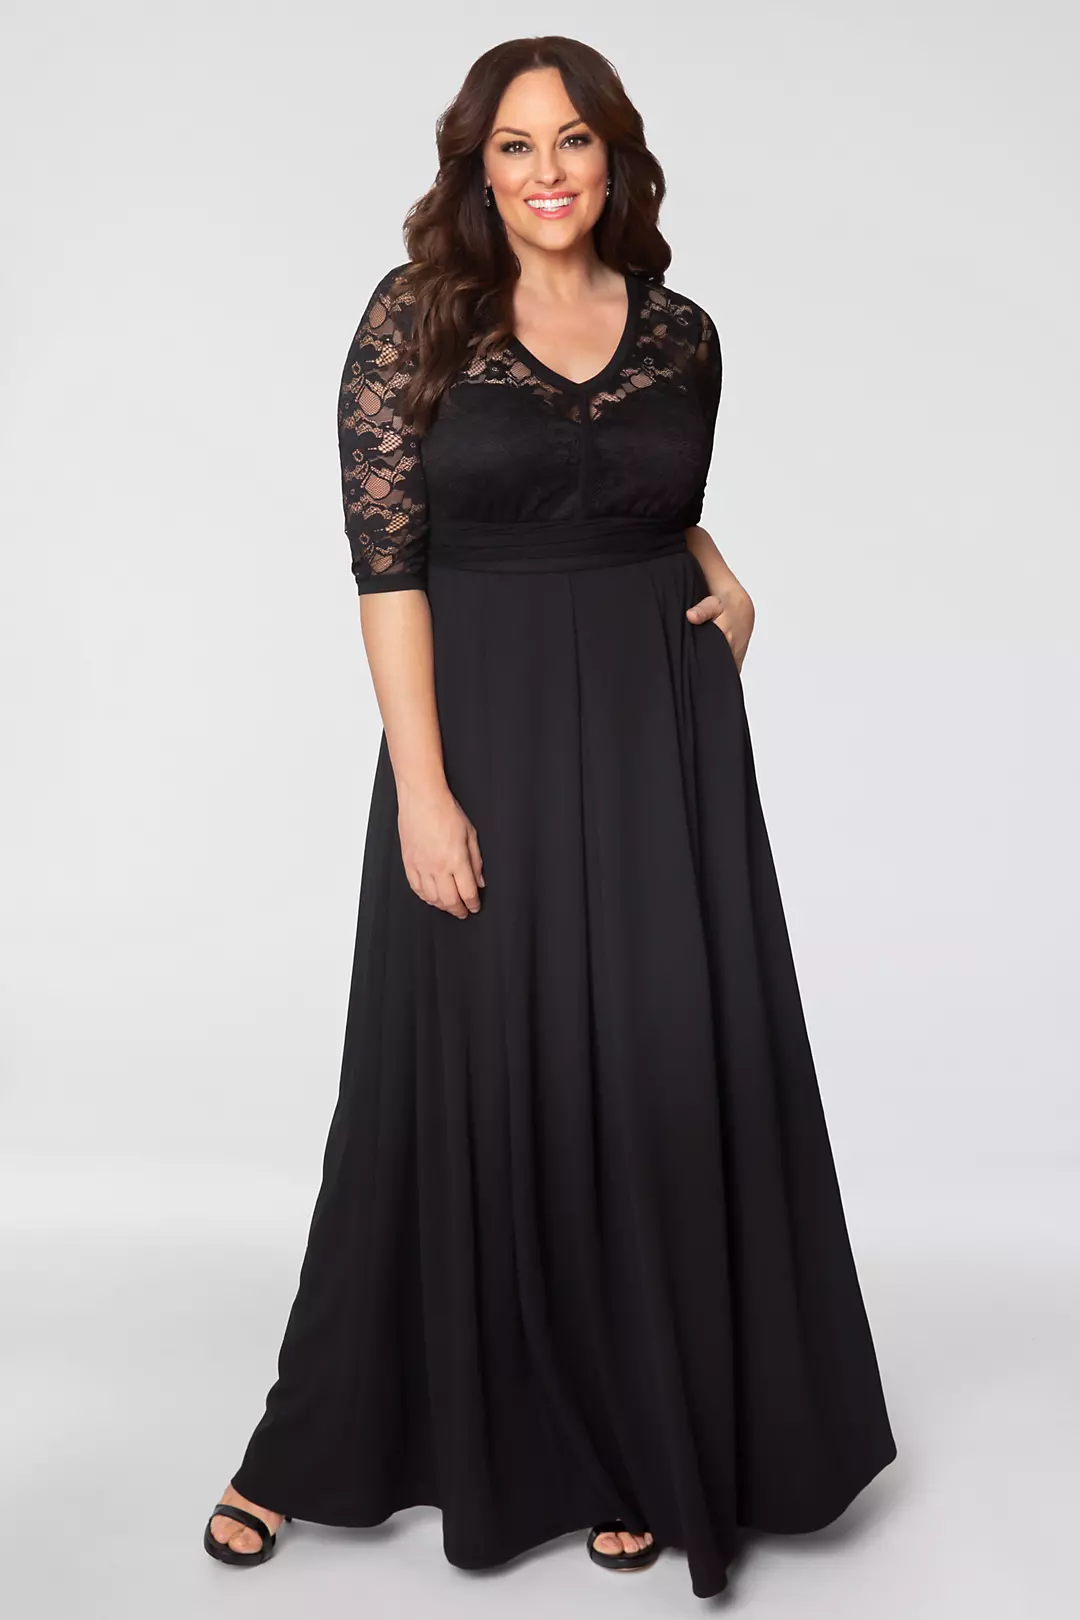 Madeline Plus Size Evening Gown Image